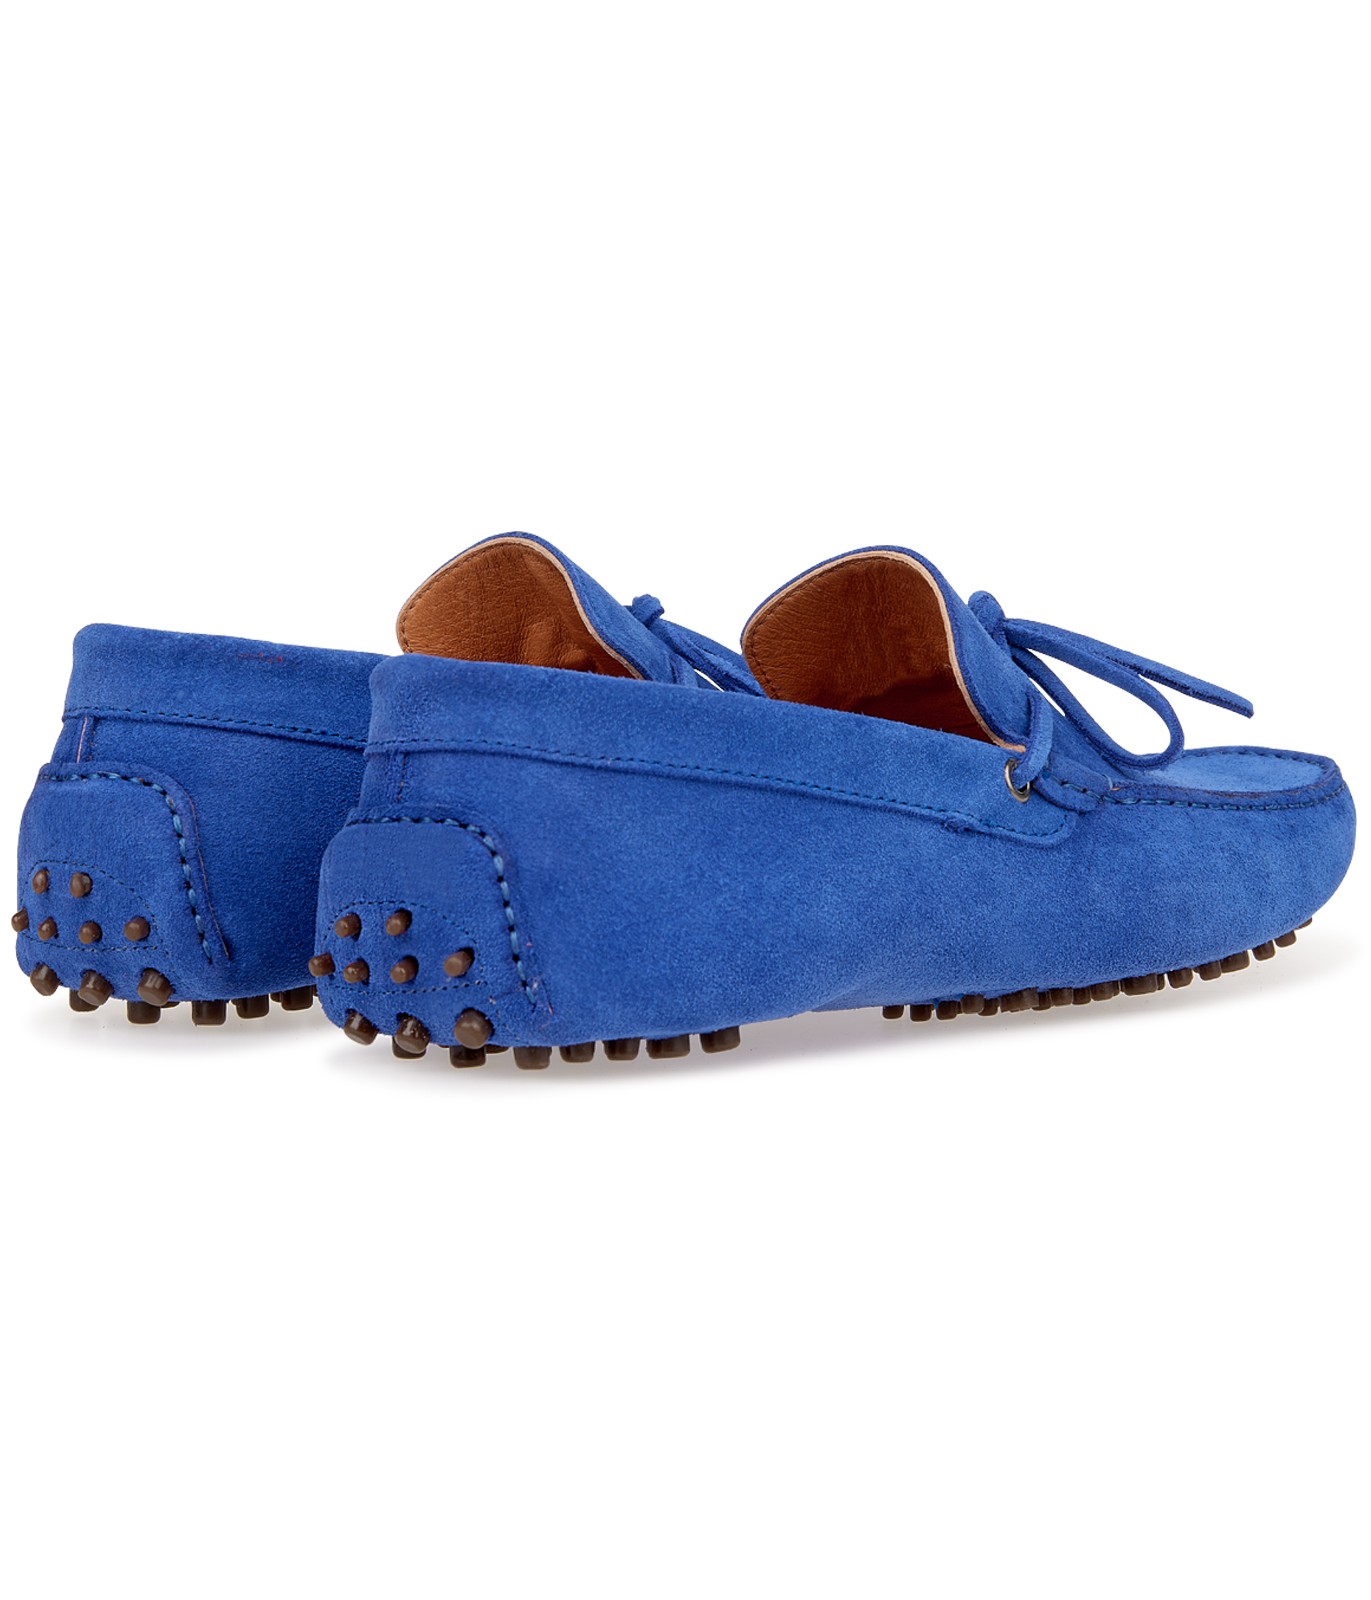 MILANO - Royal blue suede calfskin loafers